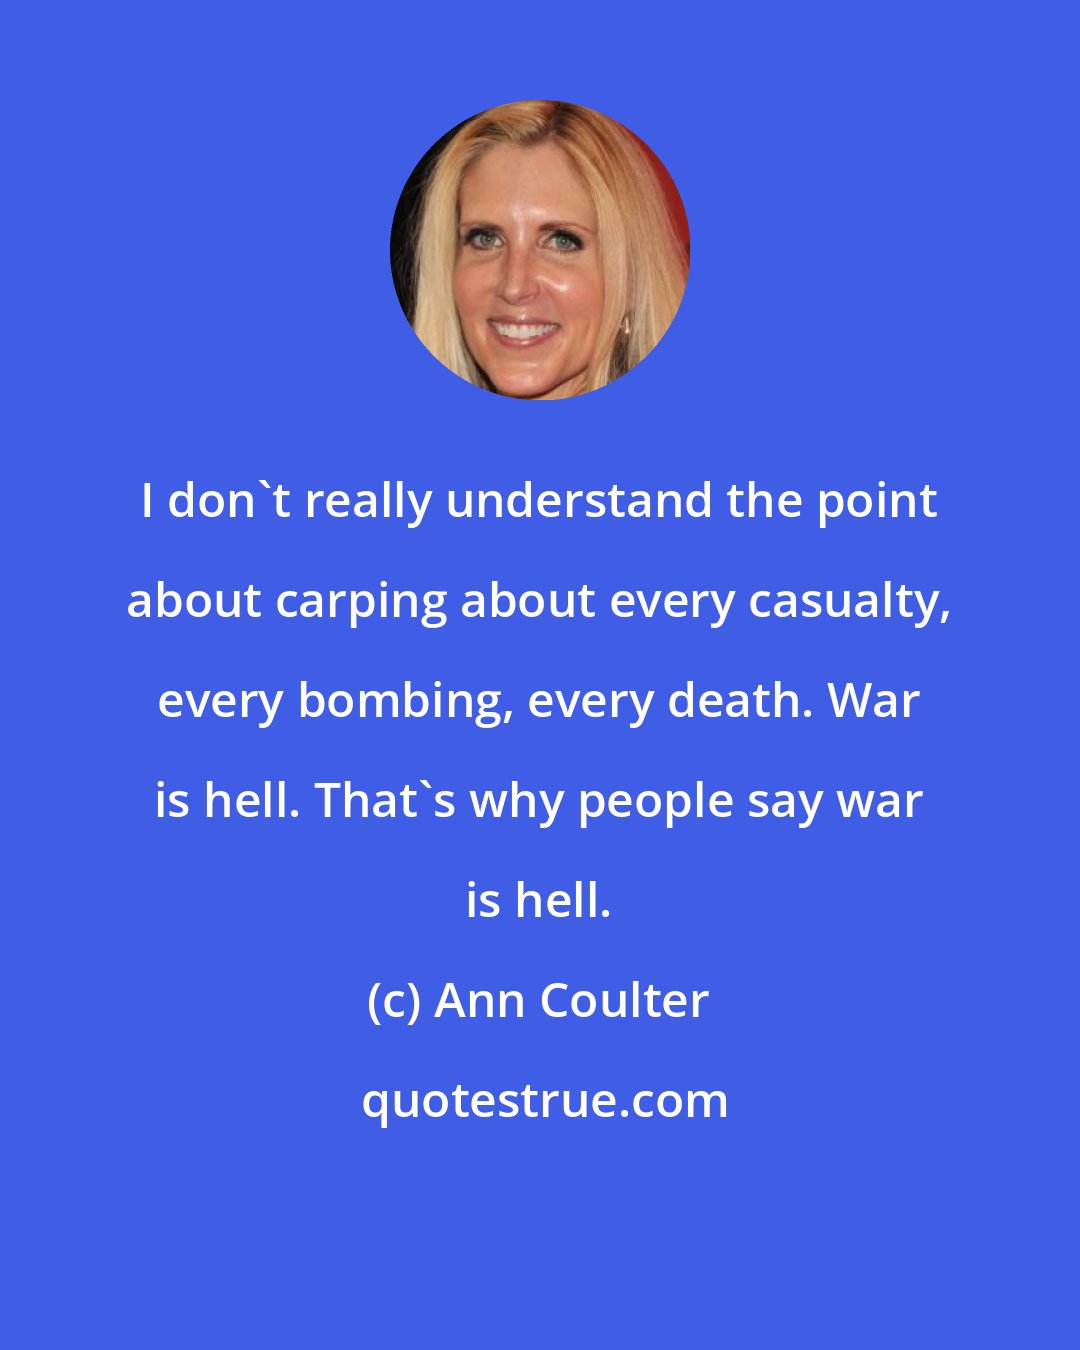 Ann Coulter: I don't really understand the point about carping about every casualty, every bombing, every death. War is hell. That's why people say war is hell.